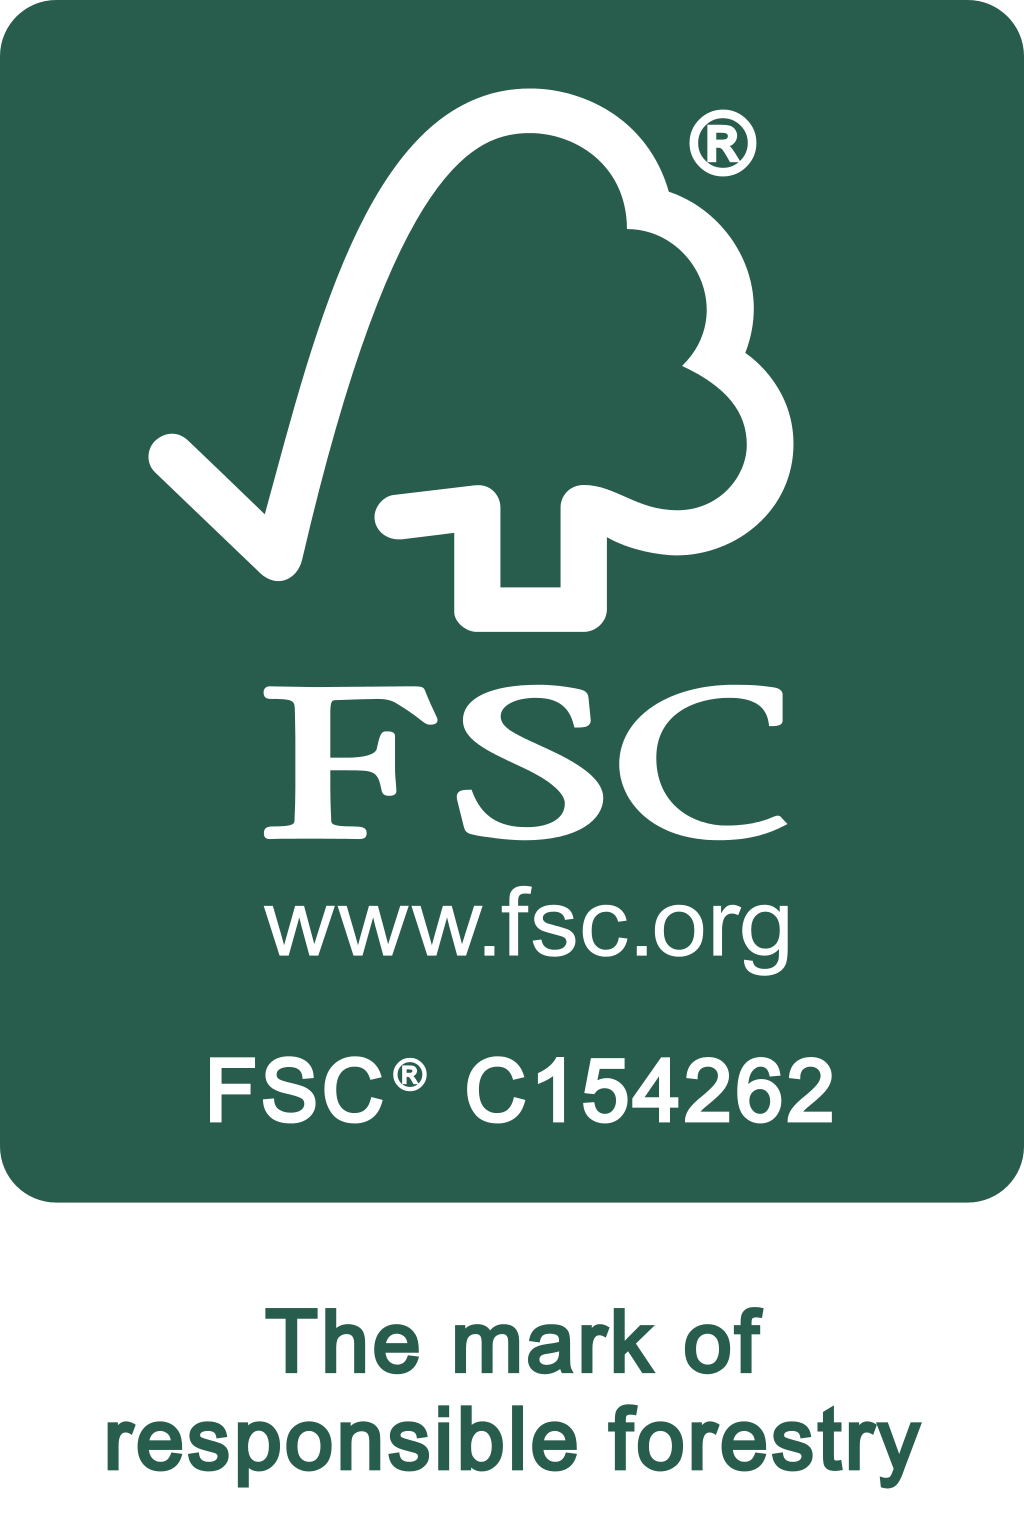 FSC_C154262_Promotional_with_text_Portrait_WhiteOnGreen_r_P4aekW_Englisch